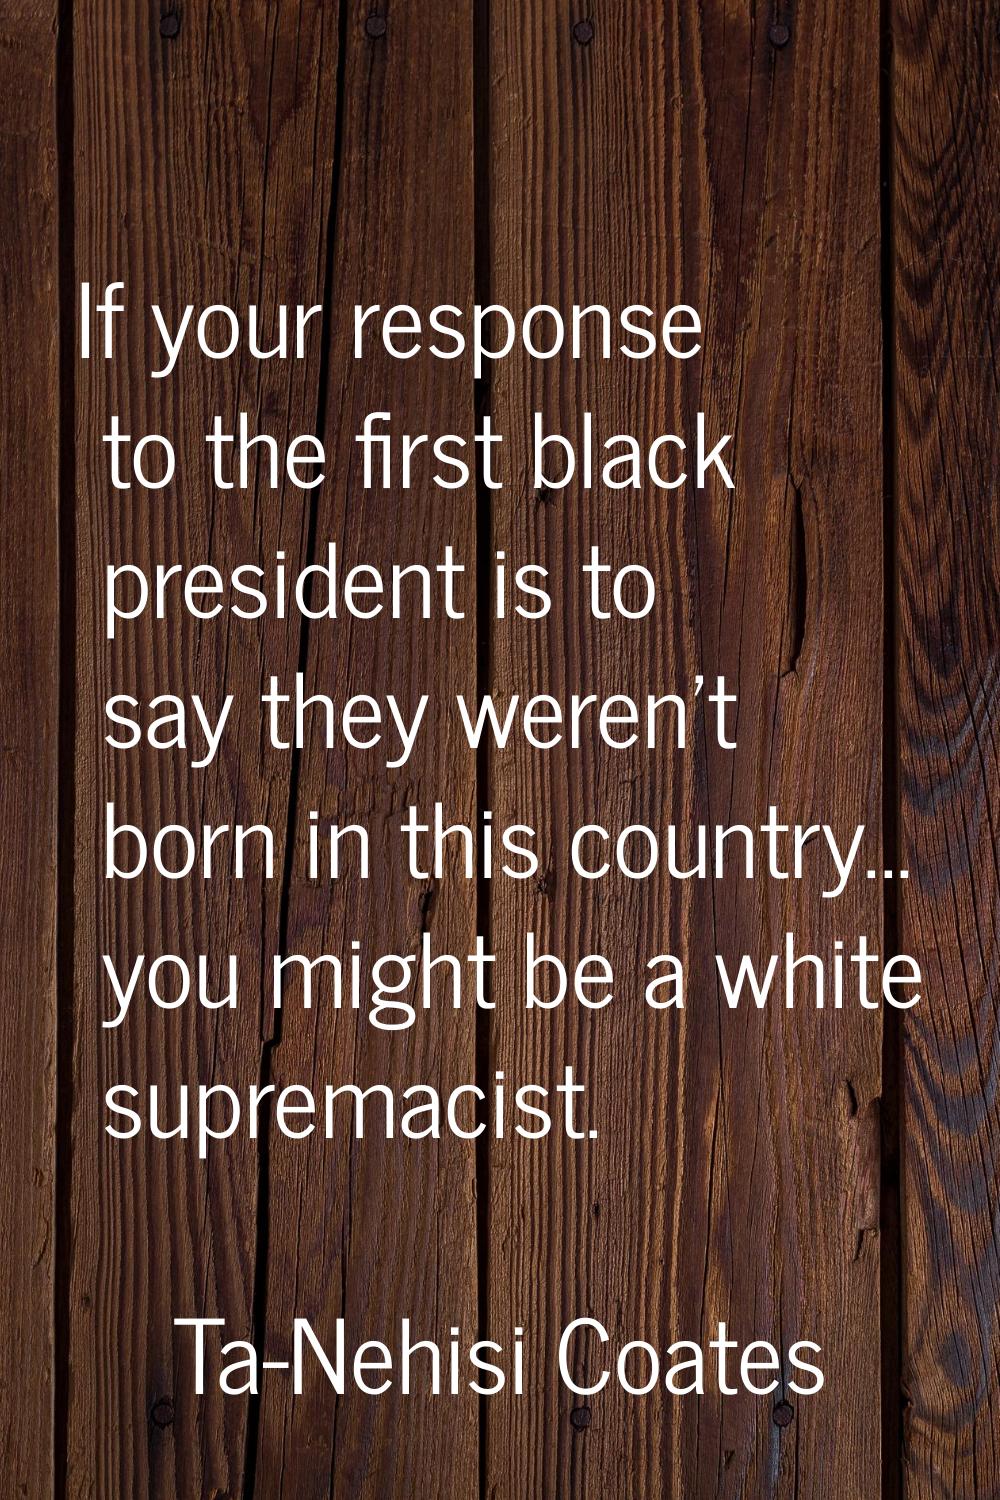 If your response to the first black president is to say they weren't born in this country... you mi